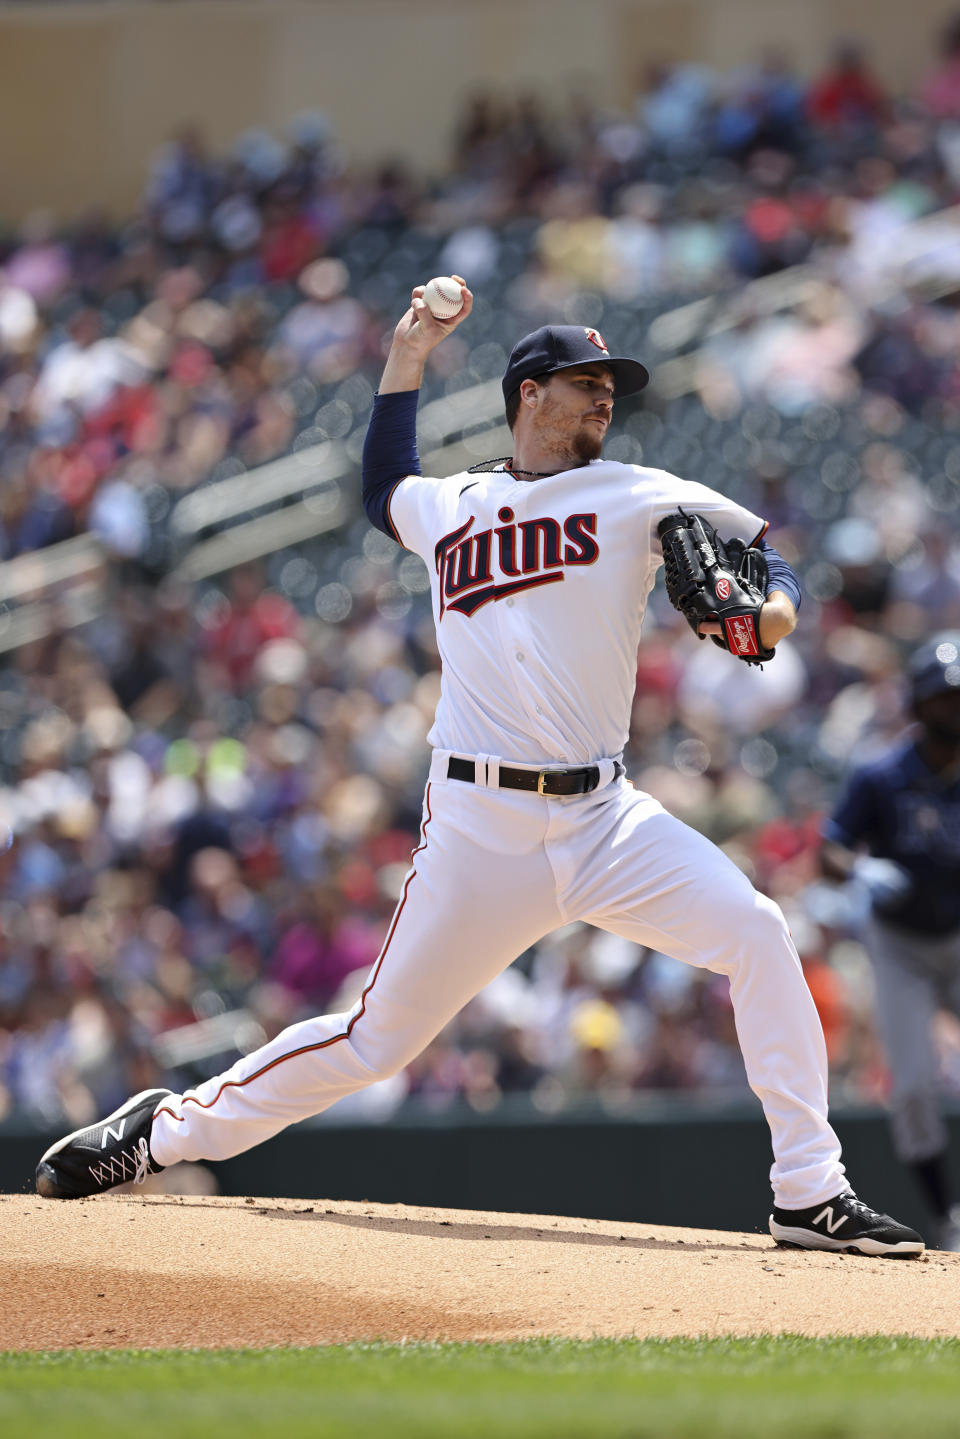 Minnesota Twins pitcher Chi Chi Gonzalez (51) throws during the first inning of a baseball game against the Tampa Bay Rays, Saturday, June 11, 2022, in Minneapolis. (AP Photo/Stacy Bengs)